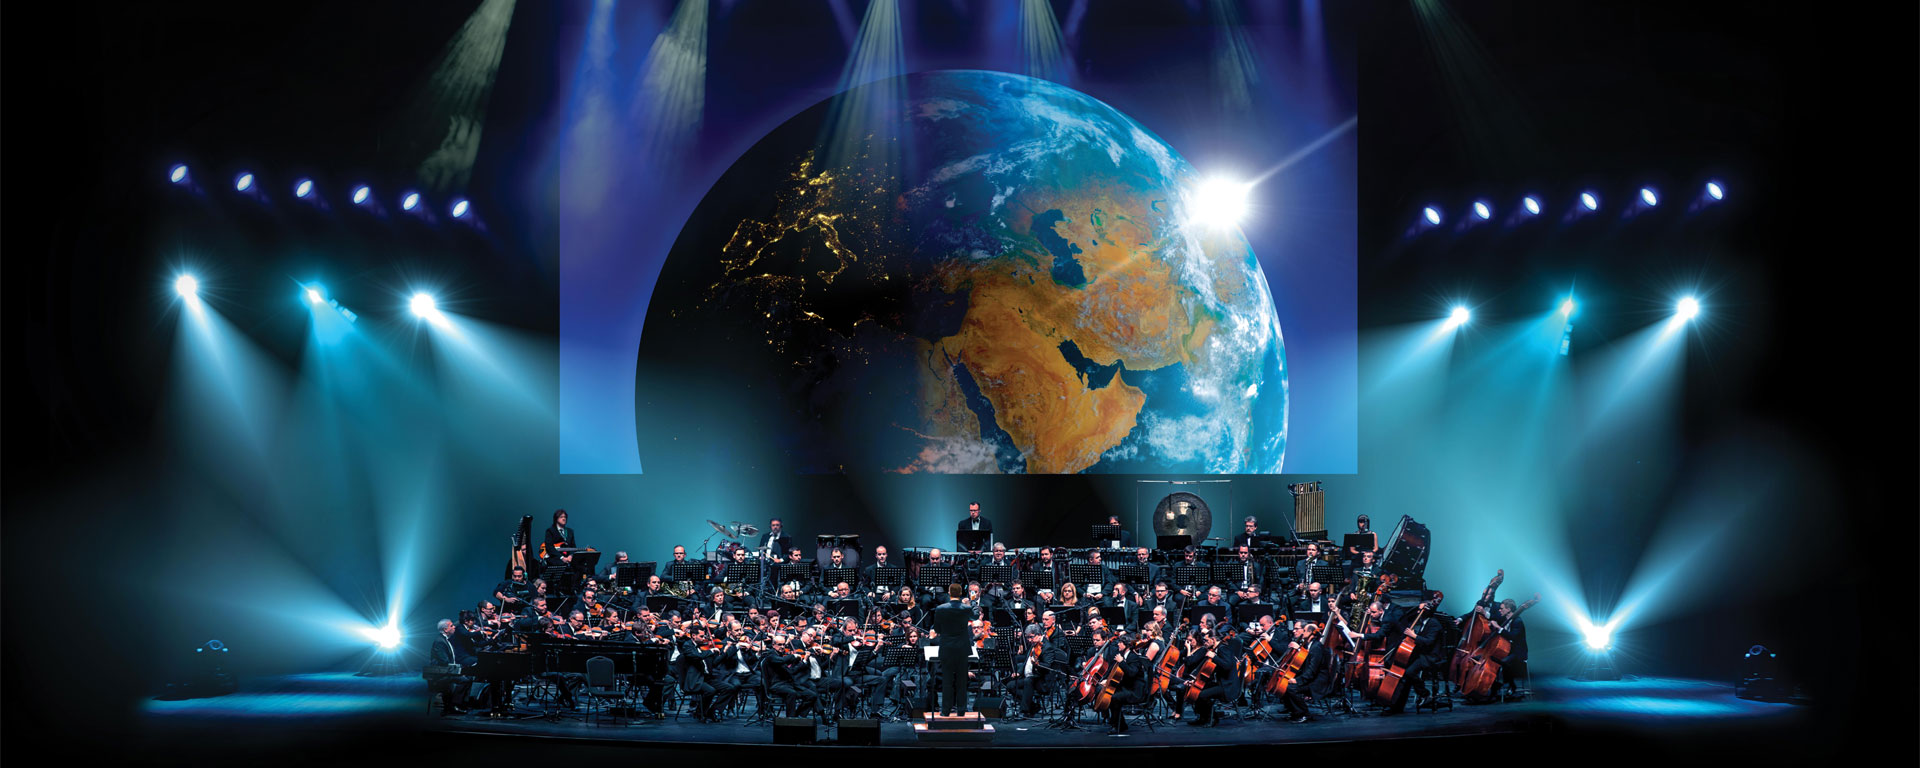 Our Planet - Live in Concert